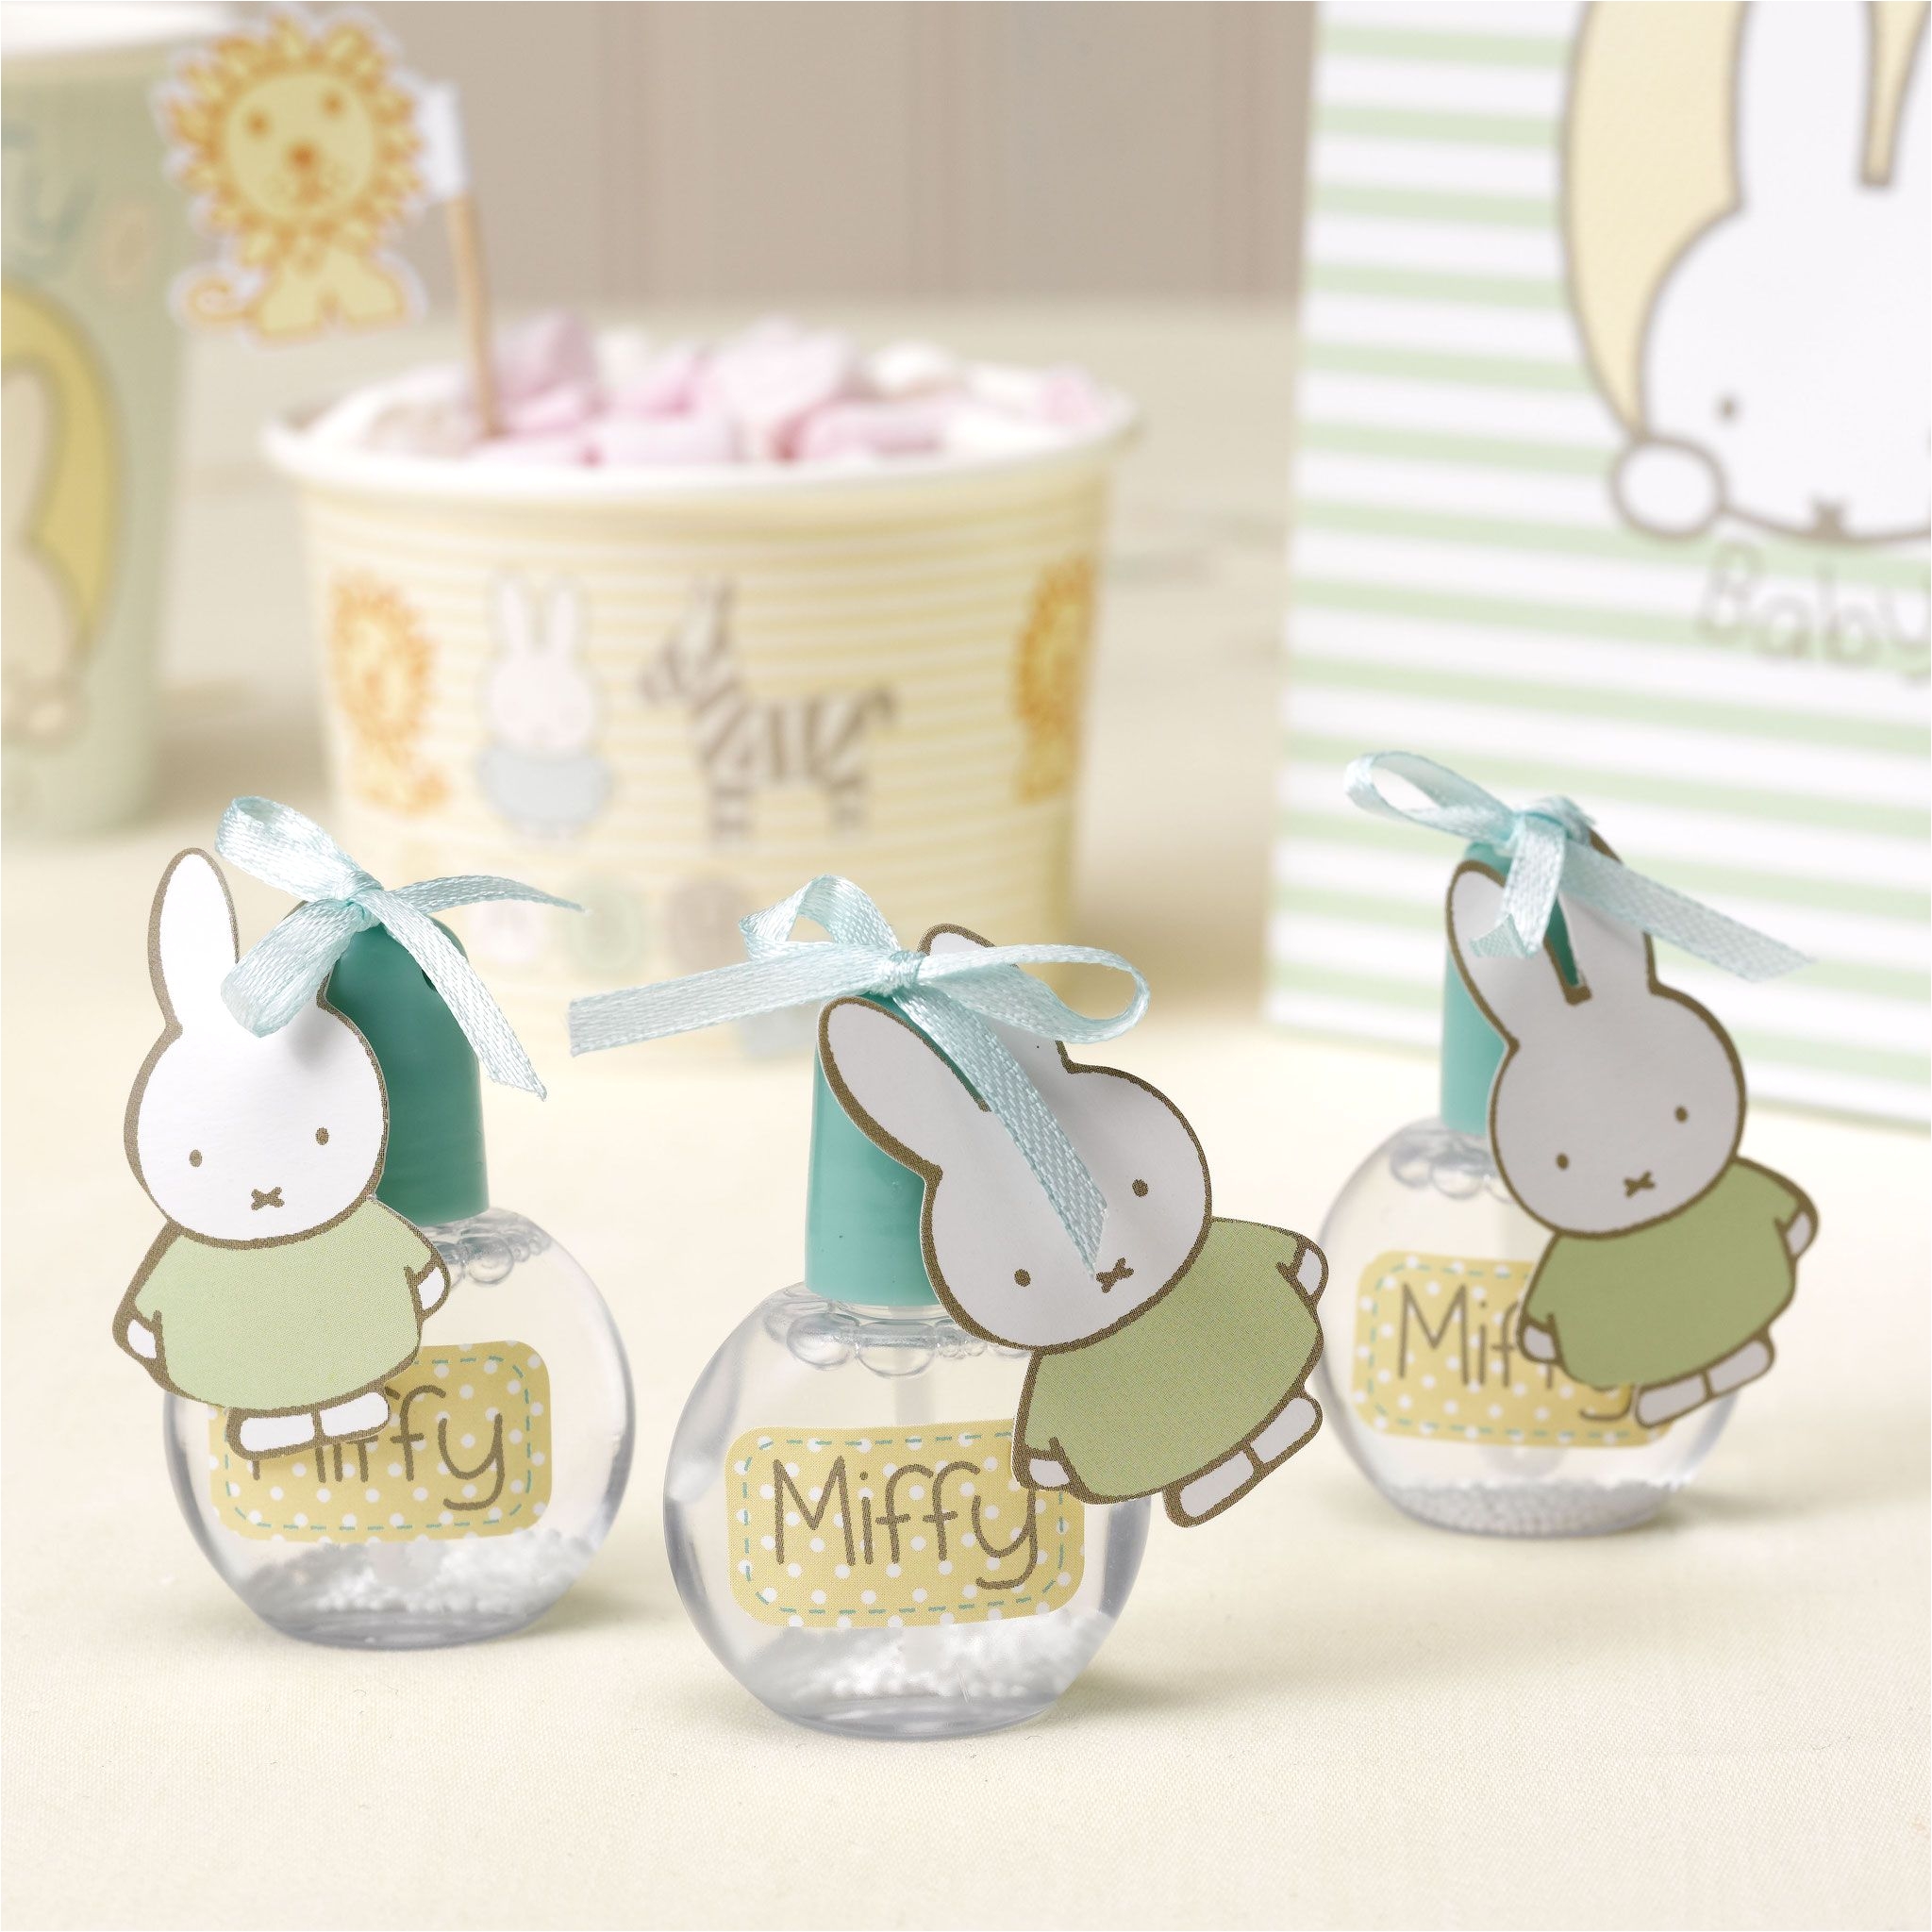 Baby Shower Party Kits Decoration Faate Miffy Premier Anniversaire Baby Shower Decoration